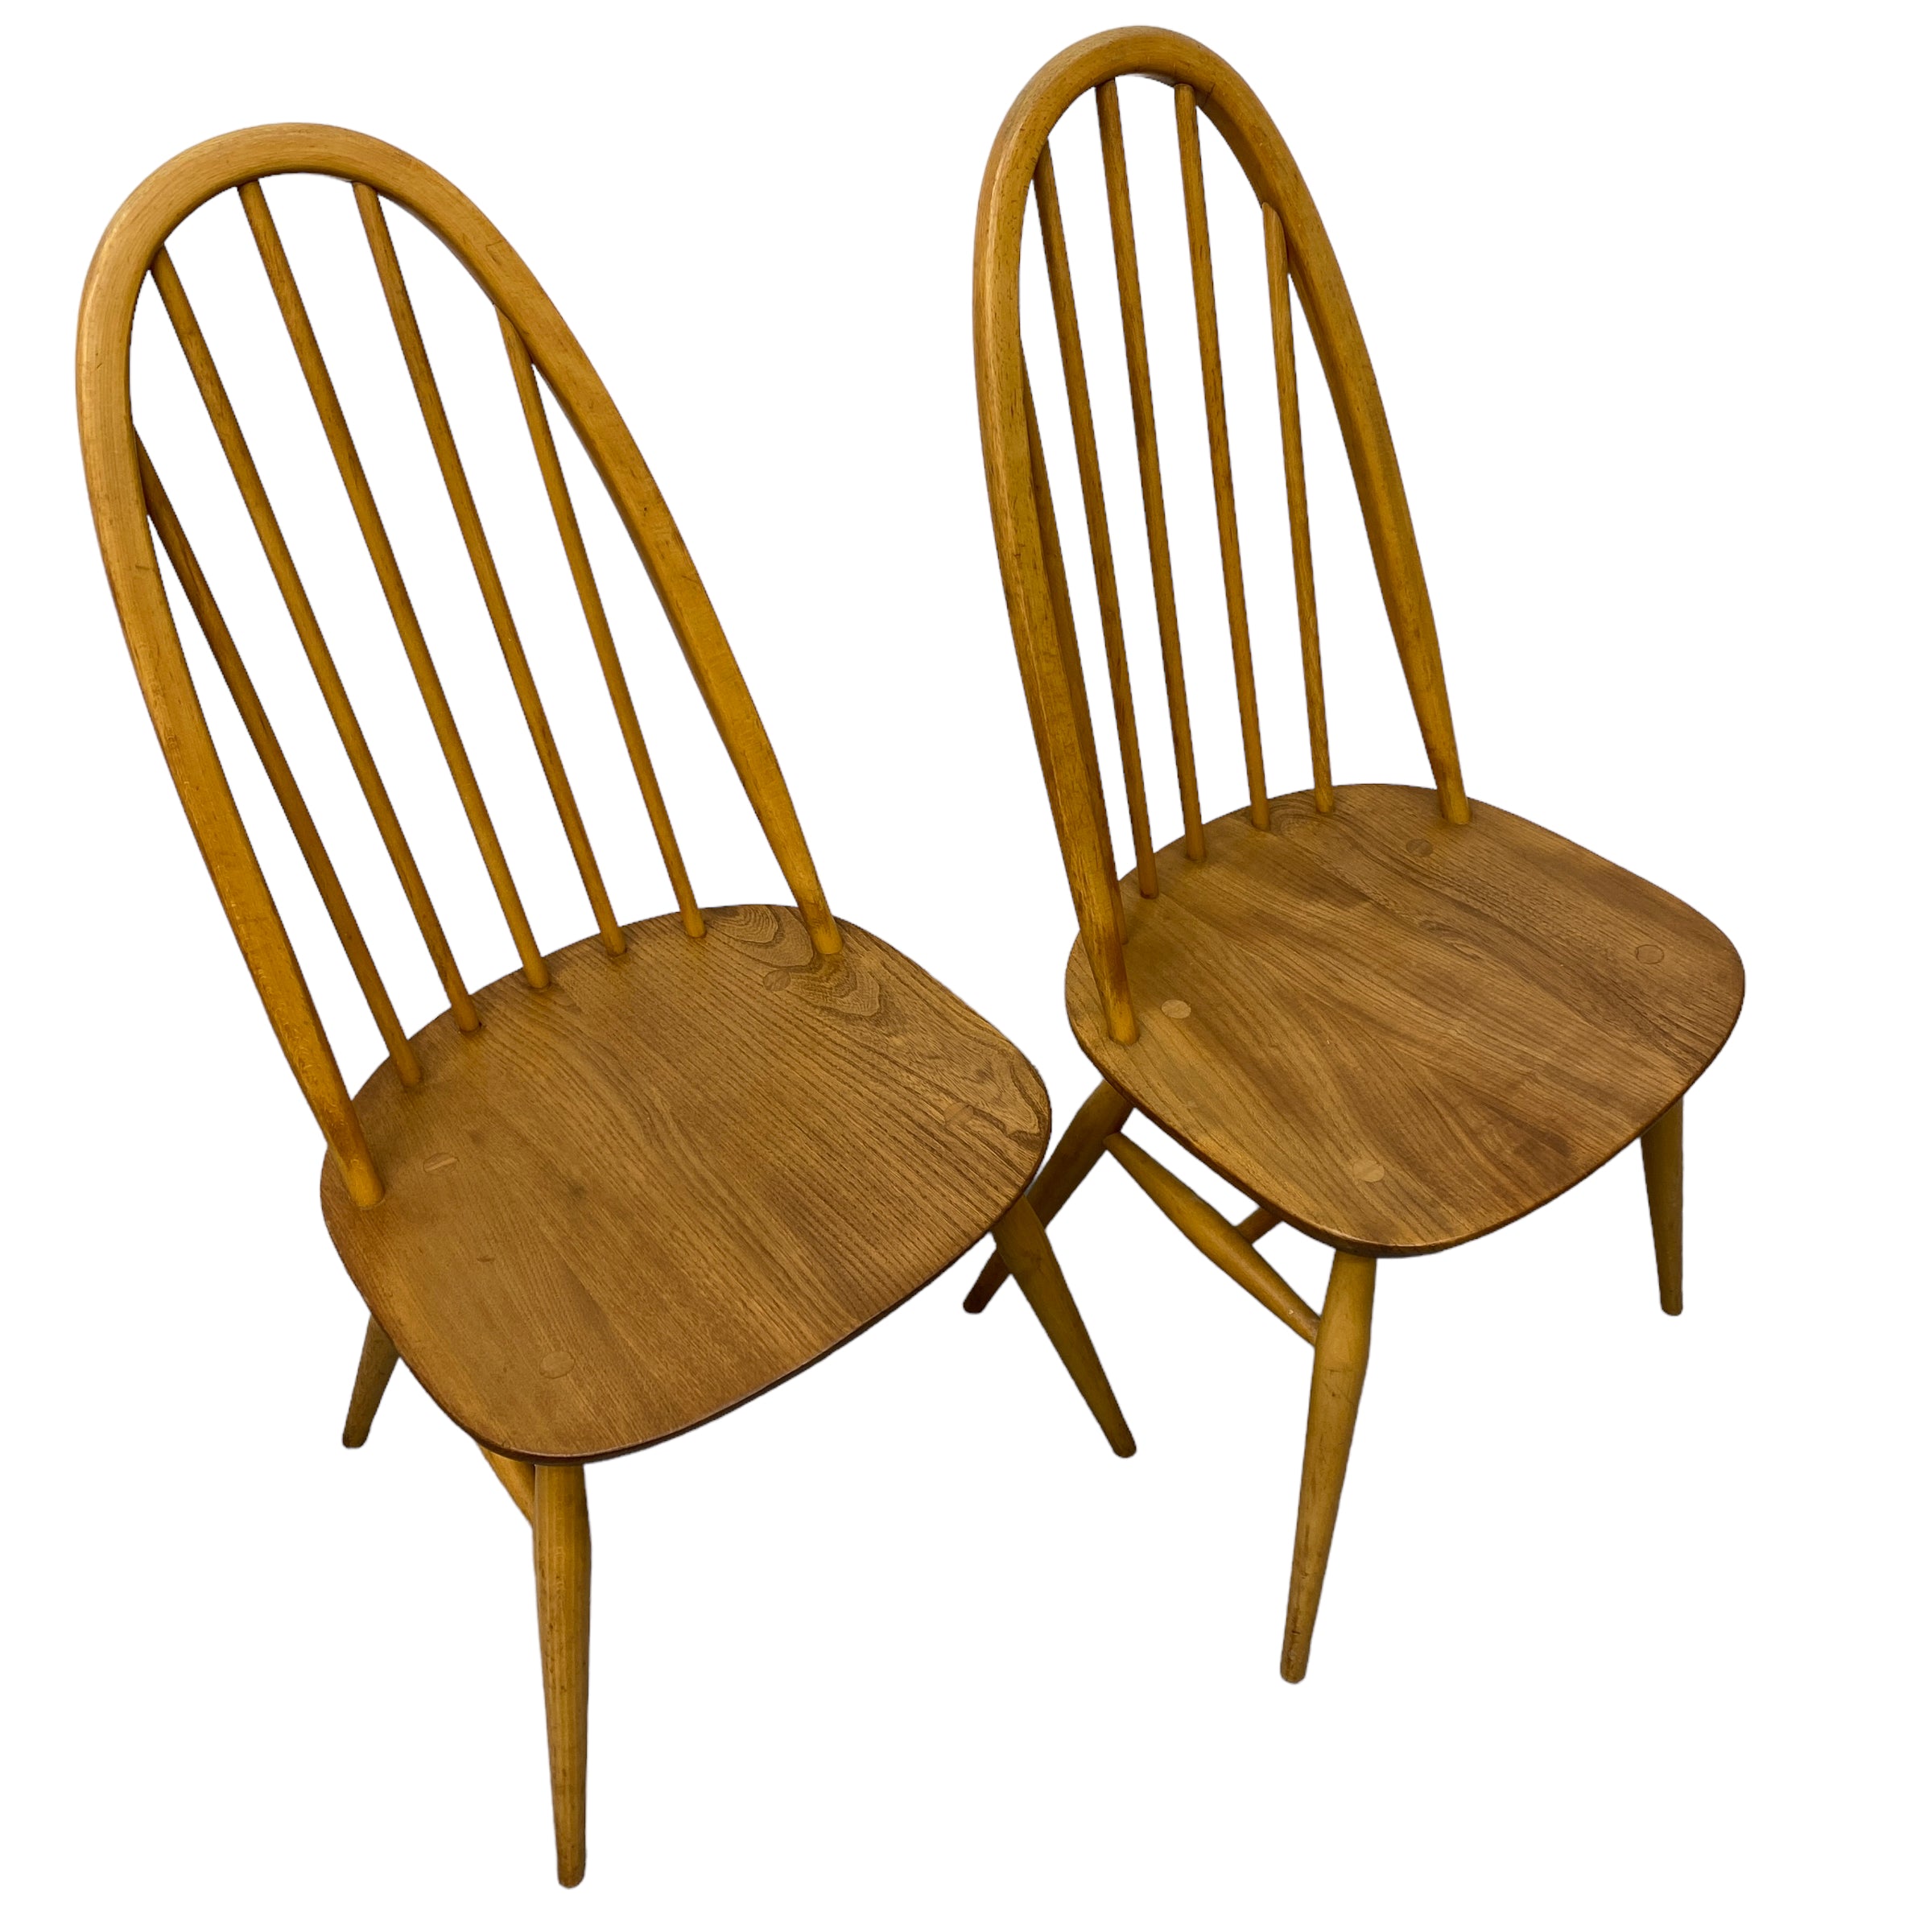 Seats Of Ercol Quaker 365 Dining Chair